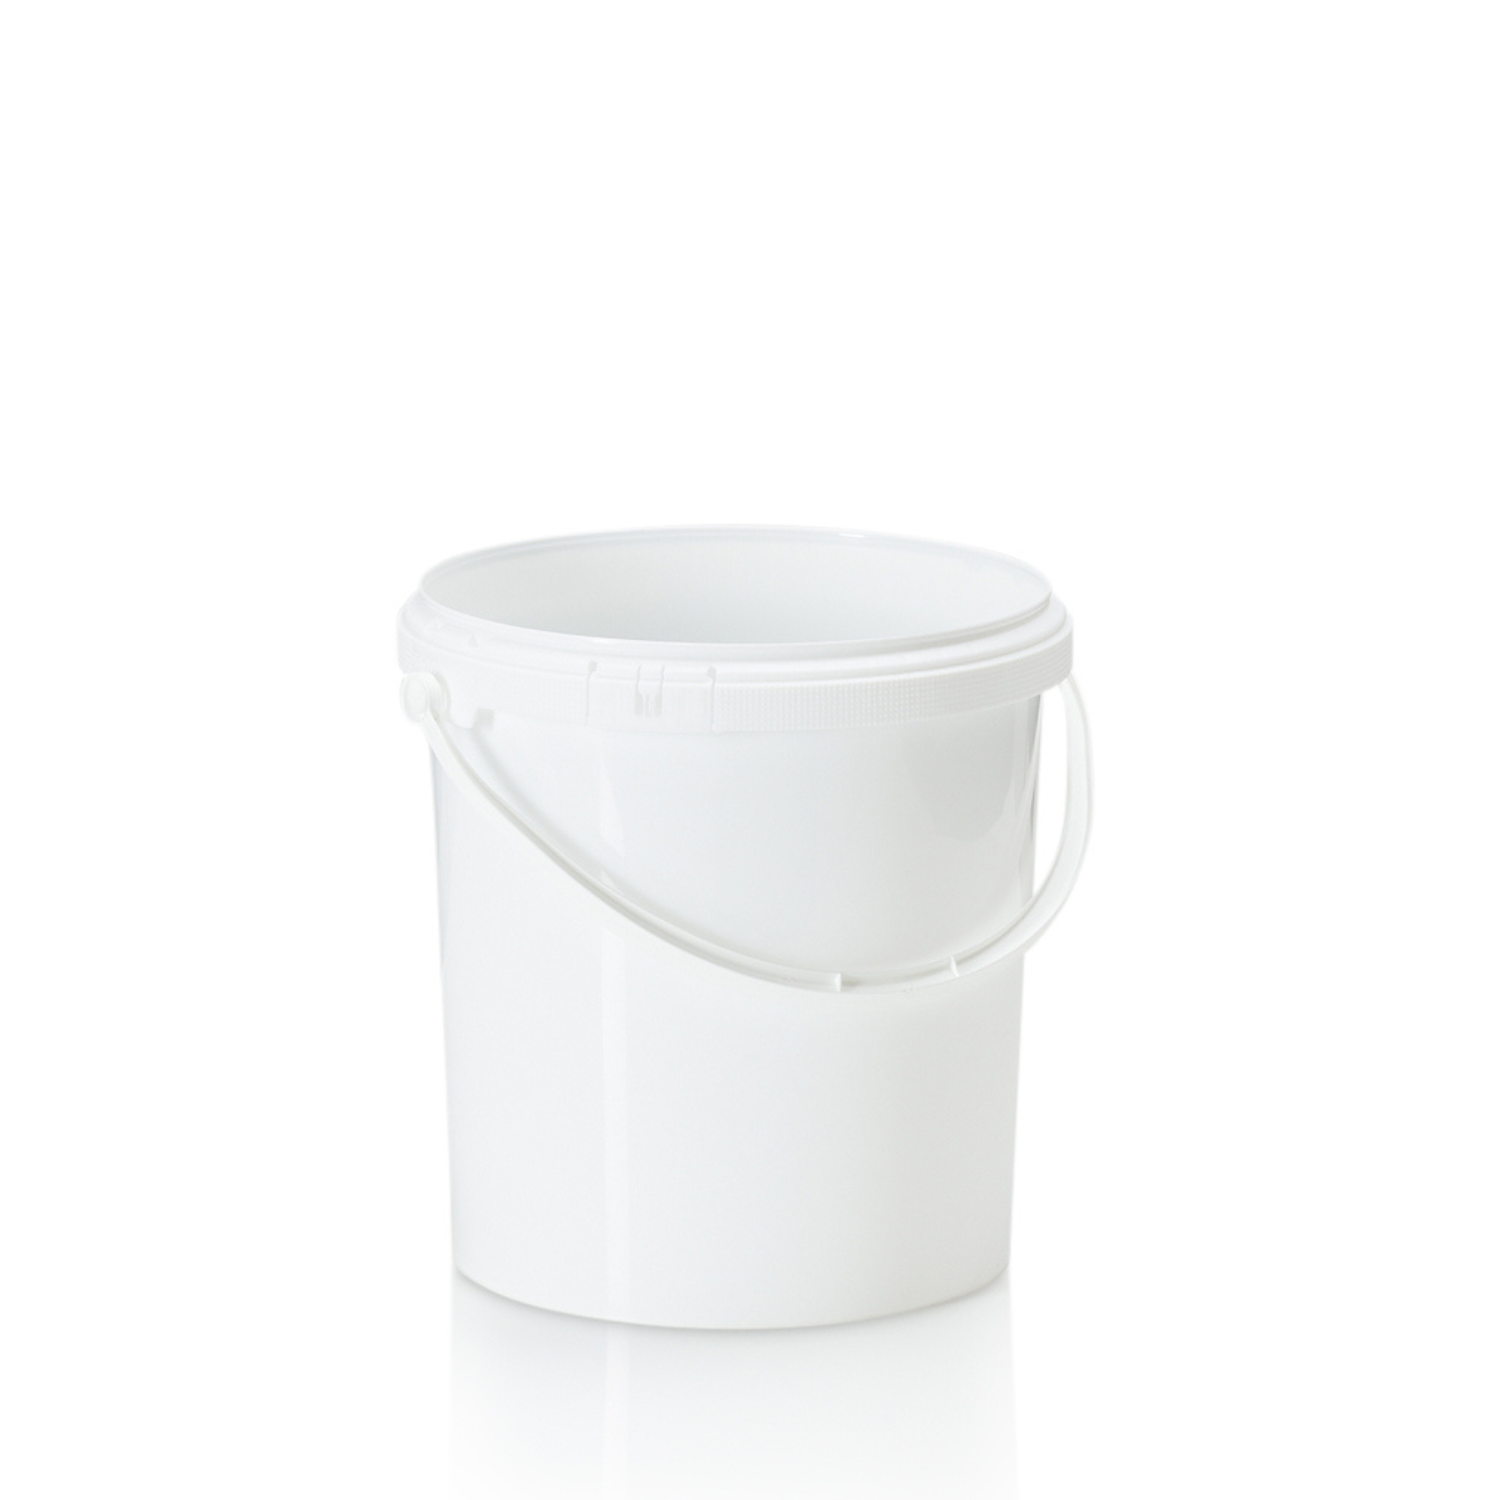 6ltr White PP Tamper Evident Pail with Plastic Handle